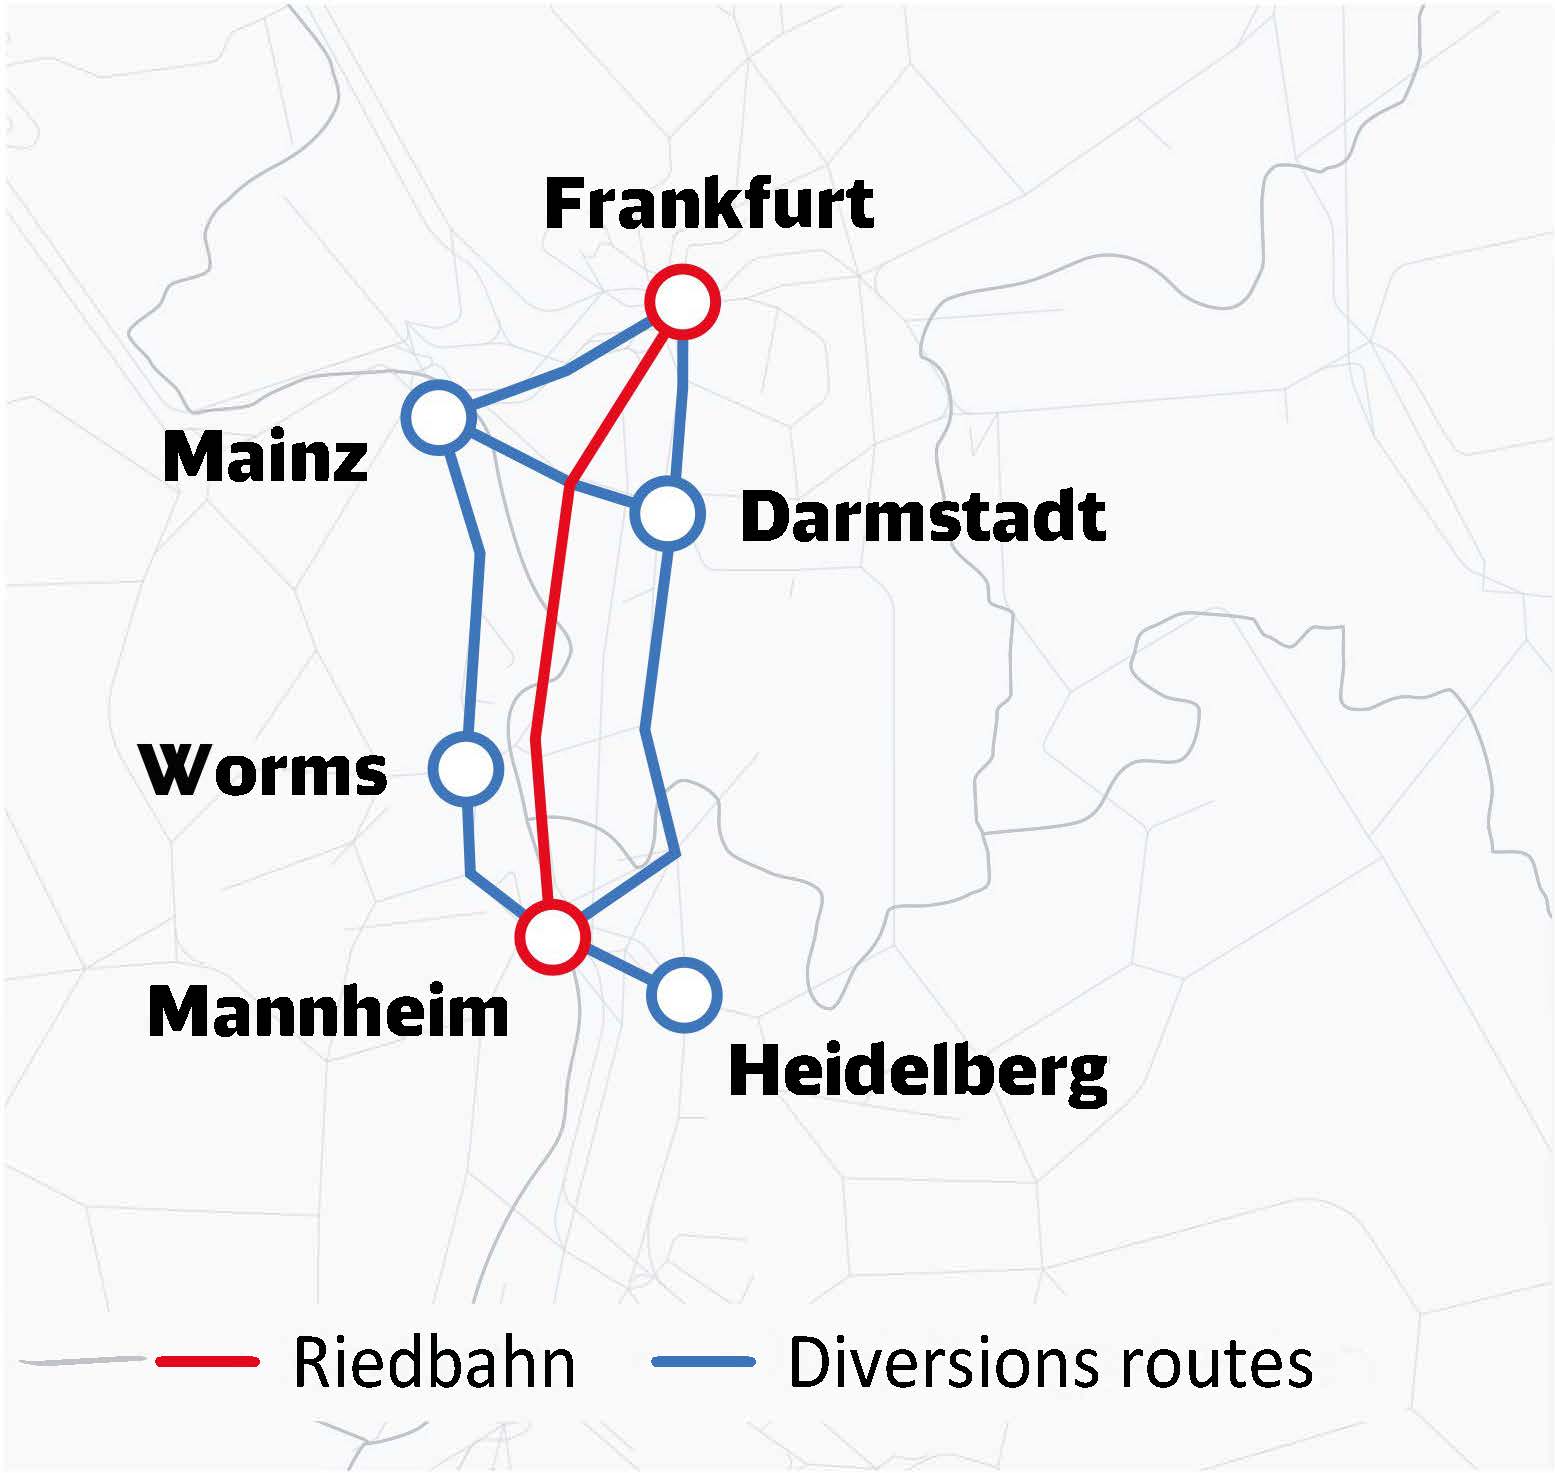 A map of south-west Germany showing the Riedbahn line and the diversion.